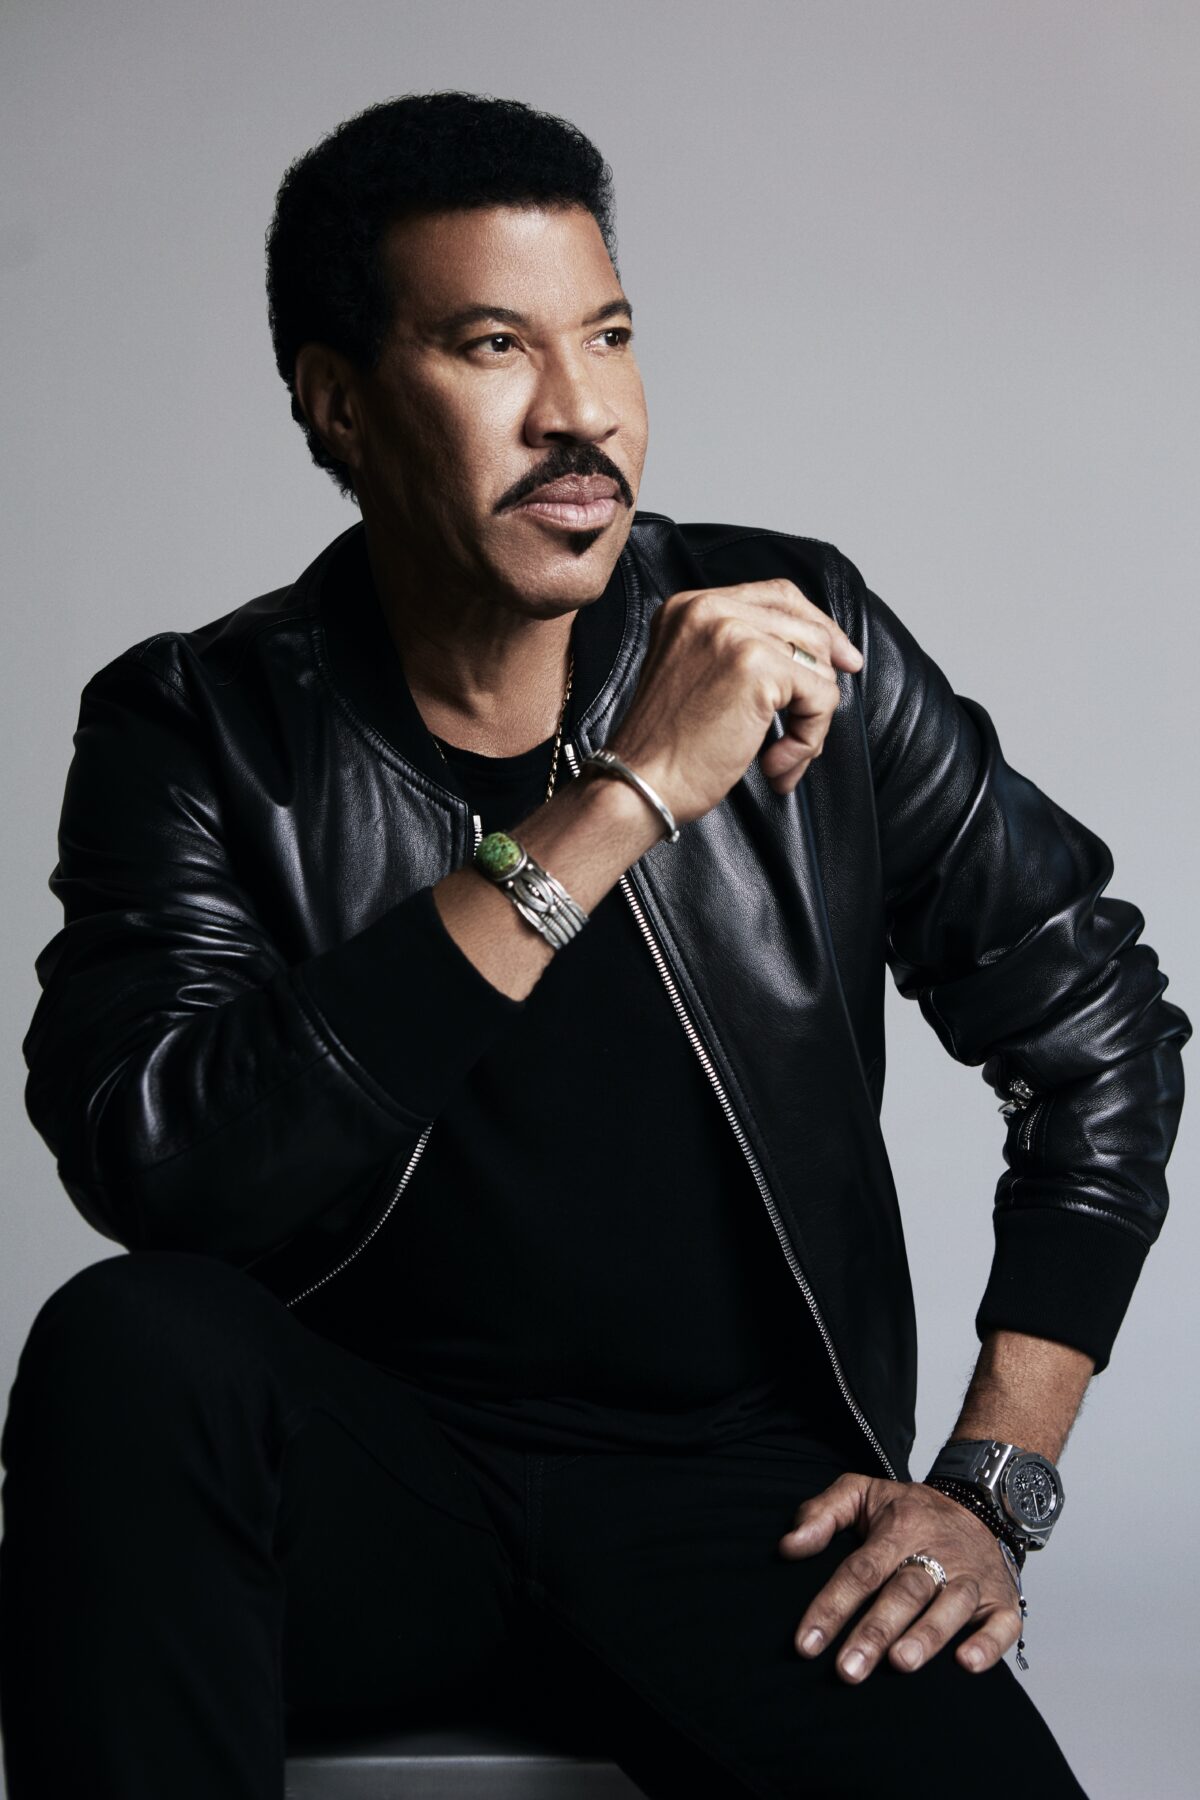 LIONEL RICHIE JOINS YOLANDA ADAMS, BOOTSY COLLINS, MORE PERFORMER LINEUP  FOR THE MUSIC OF THE WORLD GAMES